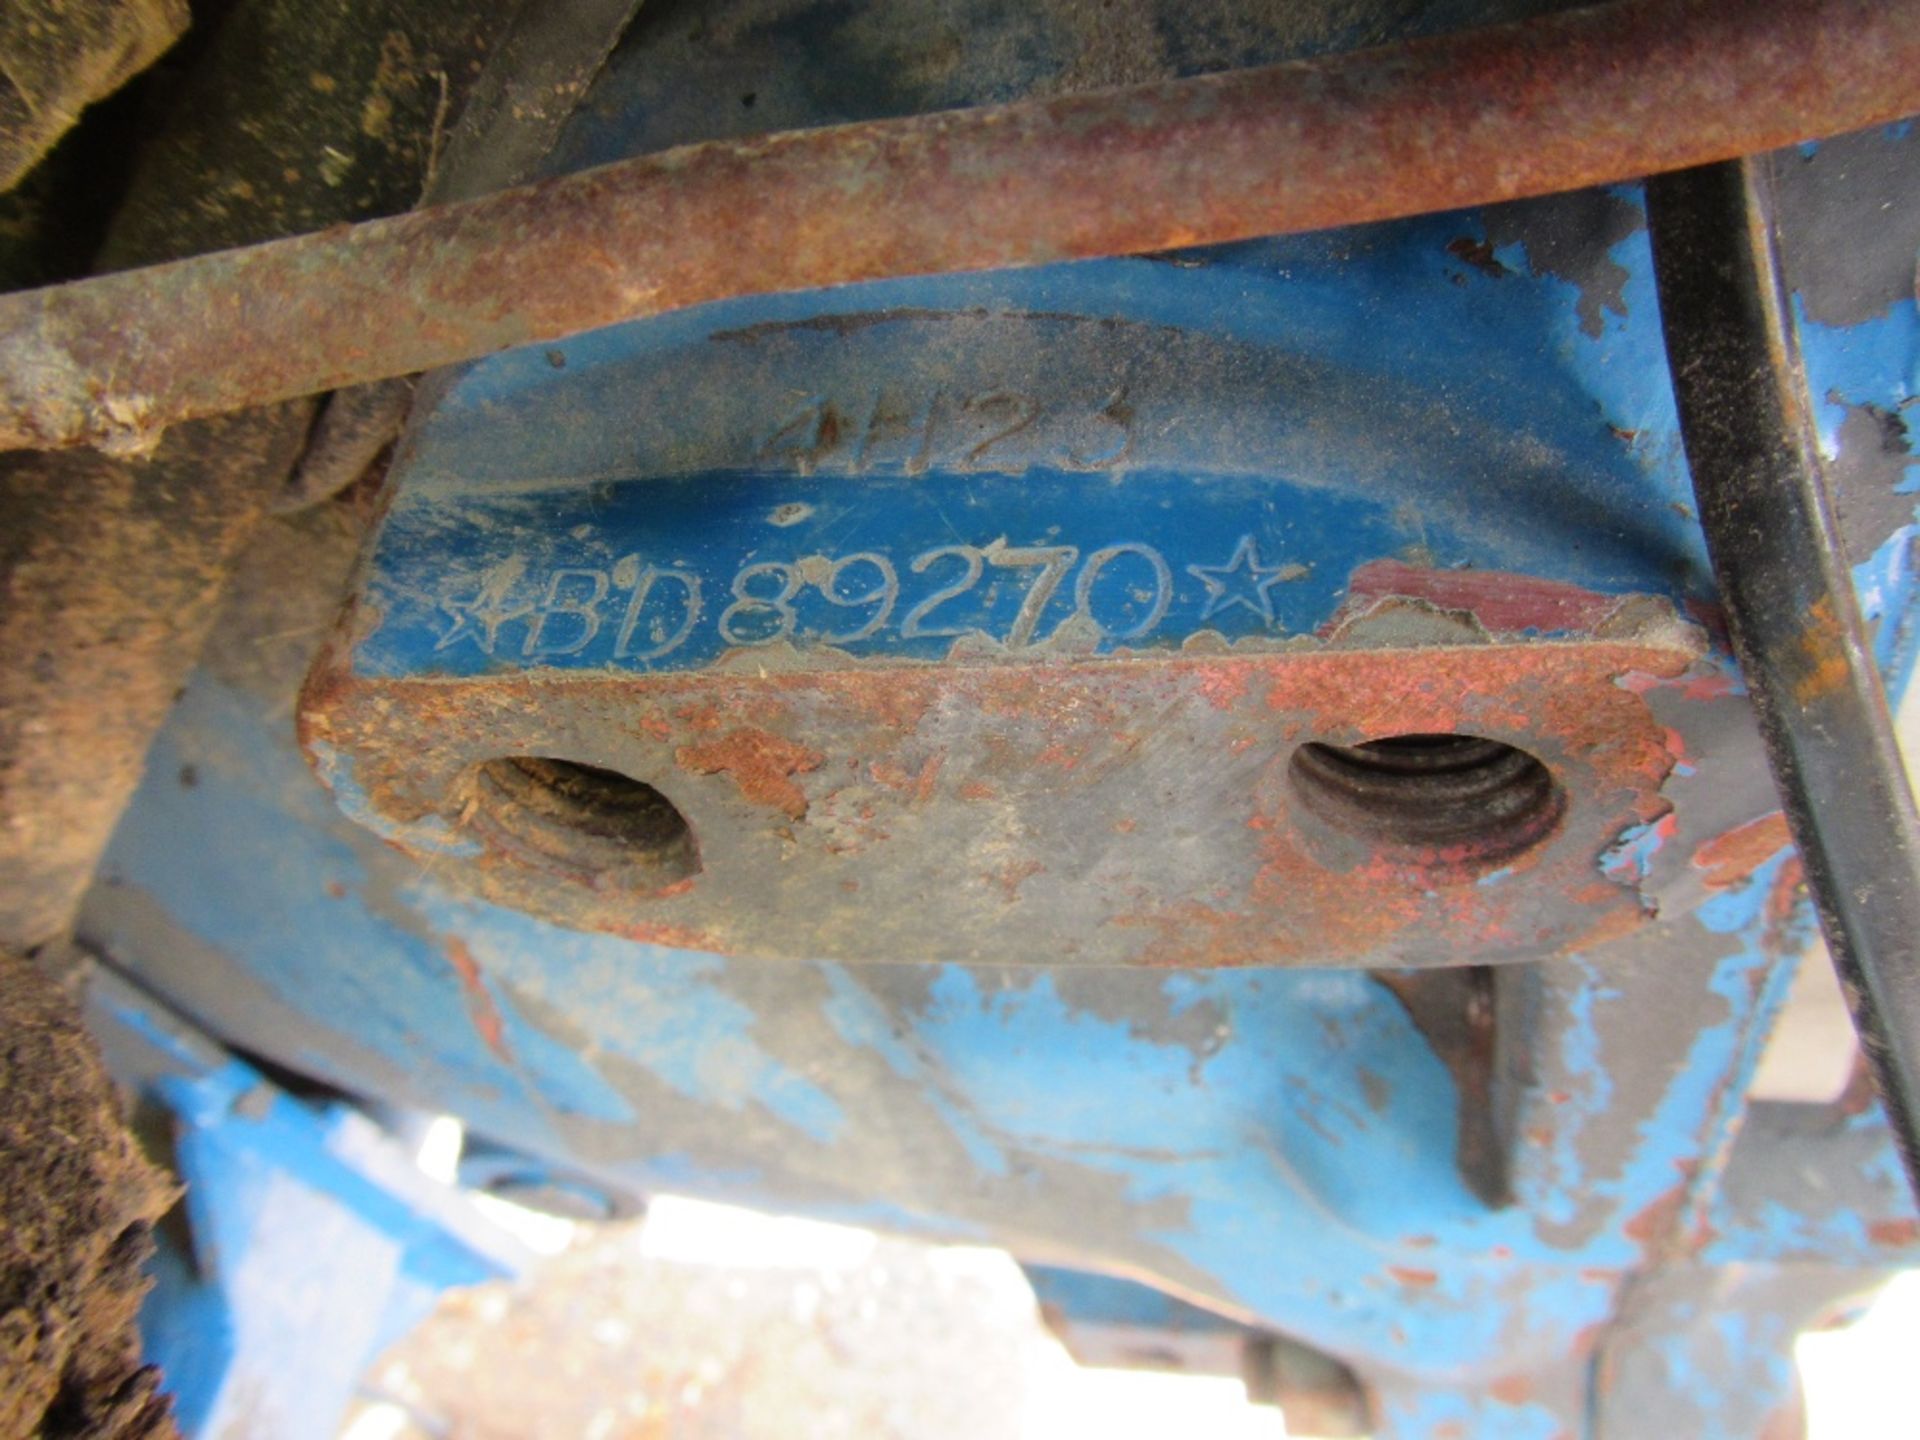 Ford 5030 2wd Tractor Reg No M637 VES Ser No BD89270 UNRESERVED LOT - Image 15 of 15